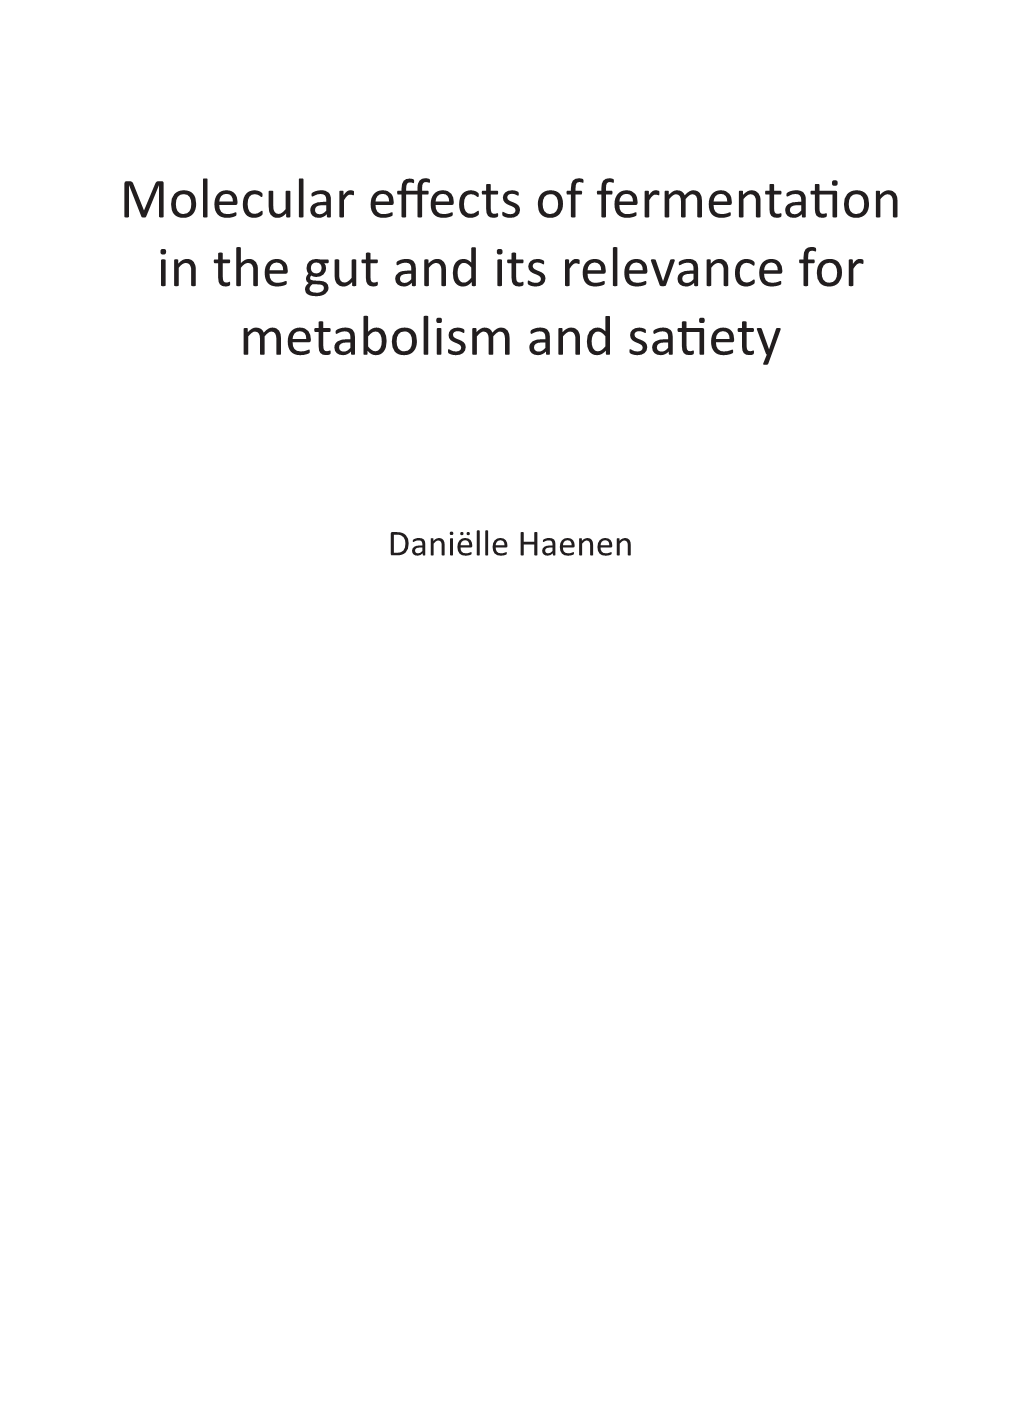 Molecular Effects of Fermentation in the Gut and Its Relevance for Metabolism and Satiety